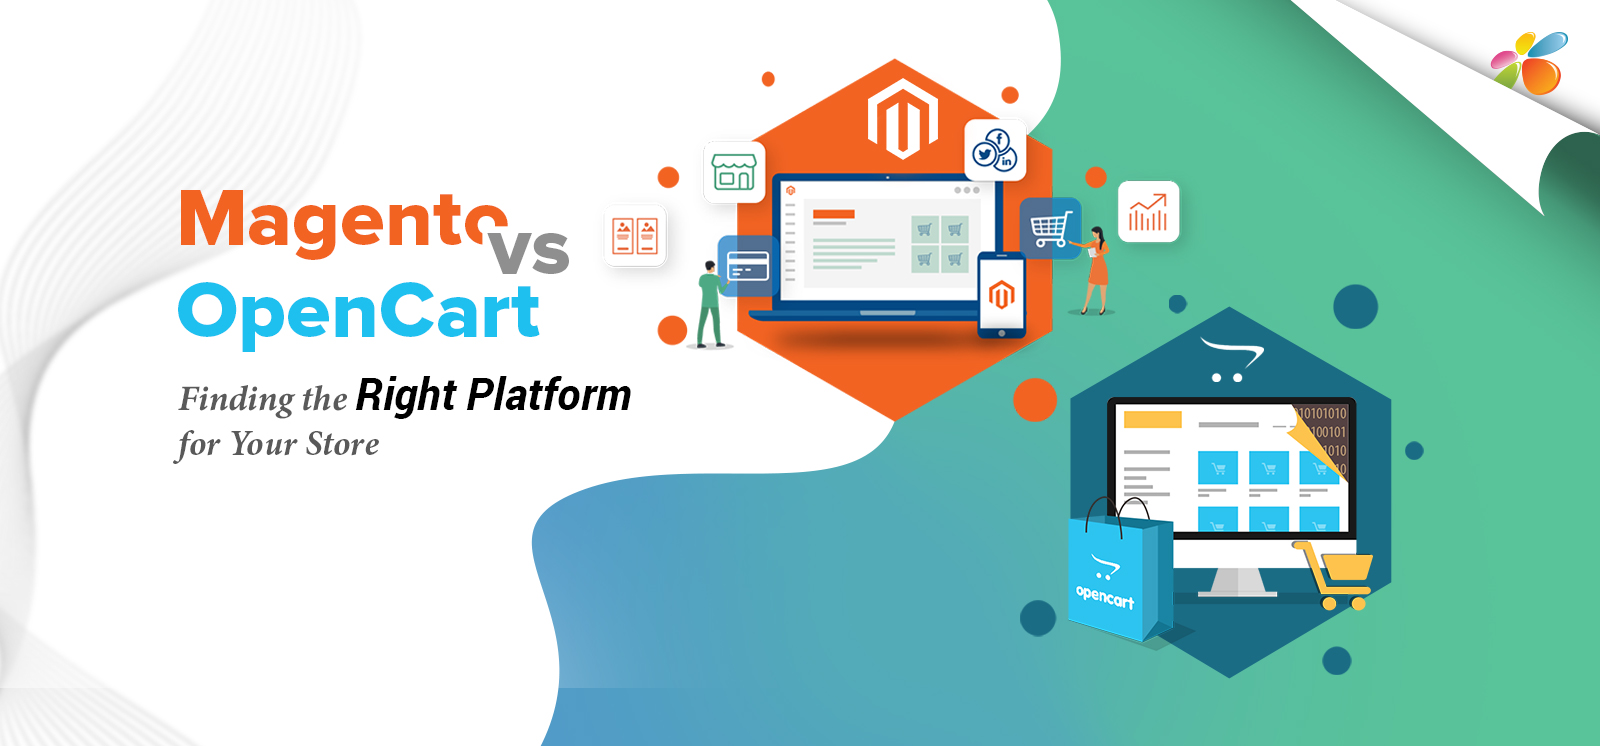 Magento vs OpenCart: Finding the Right Platform for Your Store